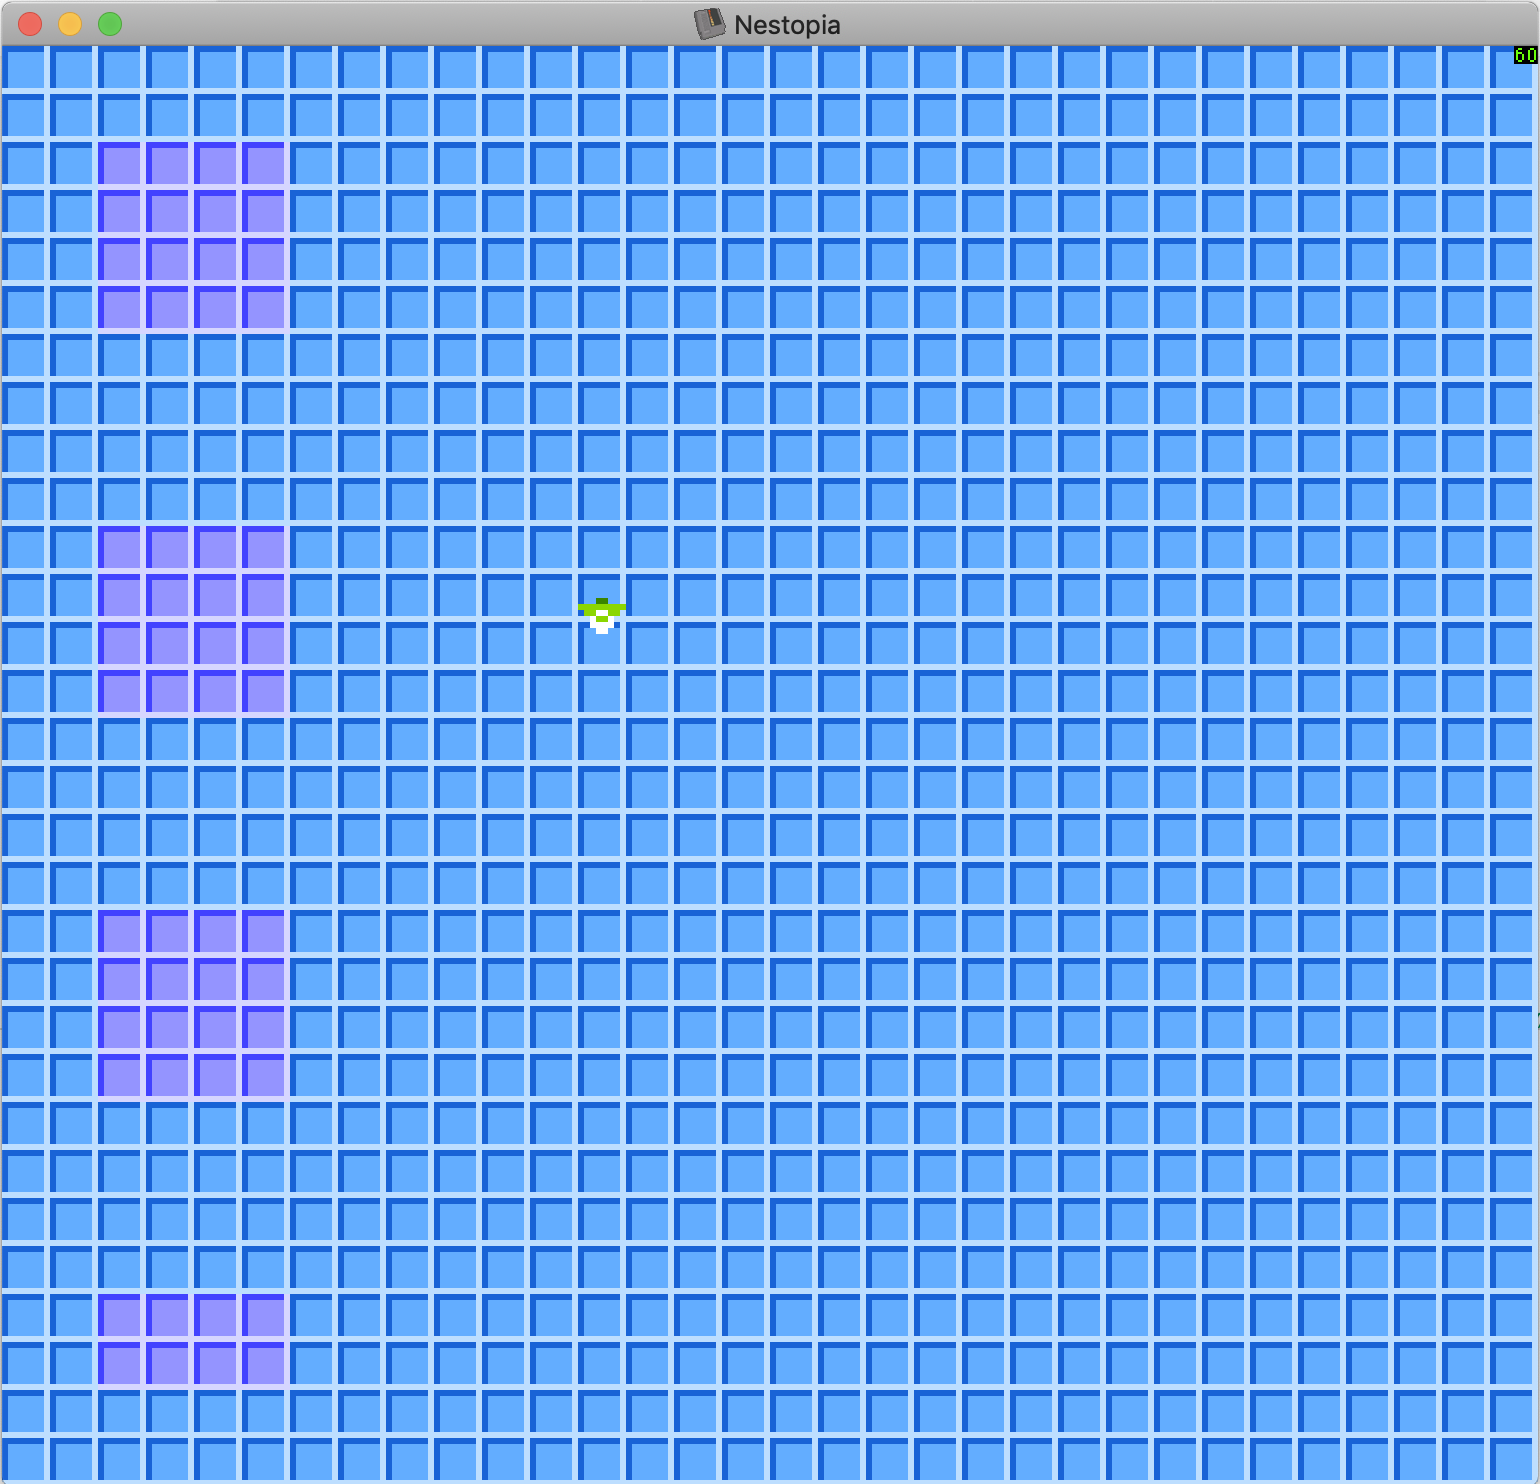 Screenshot of the game running, it shows a small green and white sprite against a three tone blue colored grid. Some sections of the grid use a three tone purple grid.